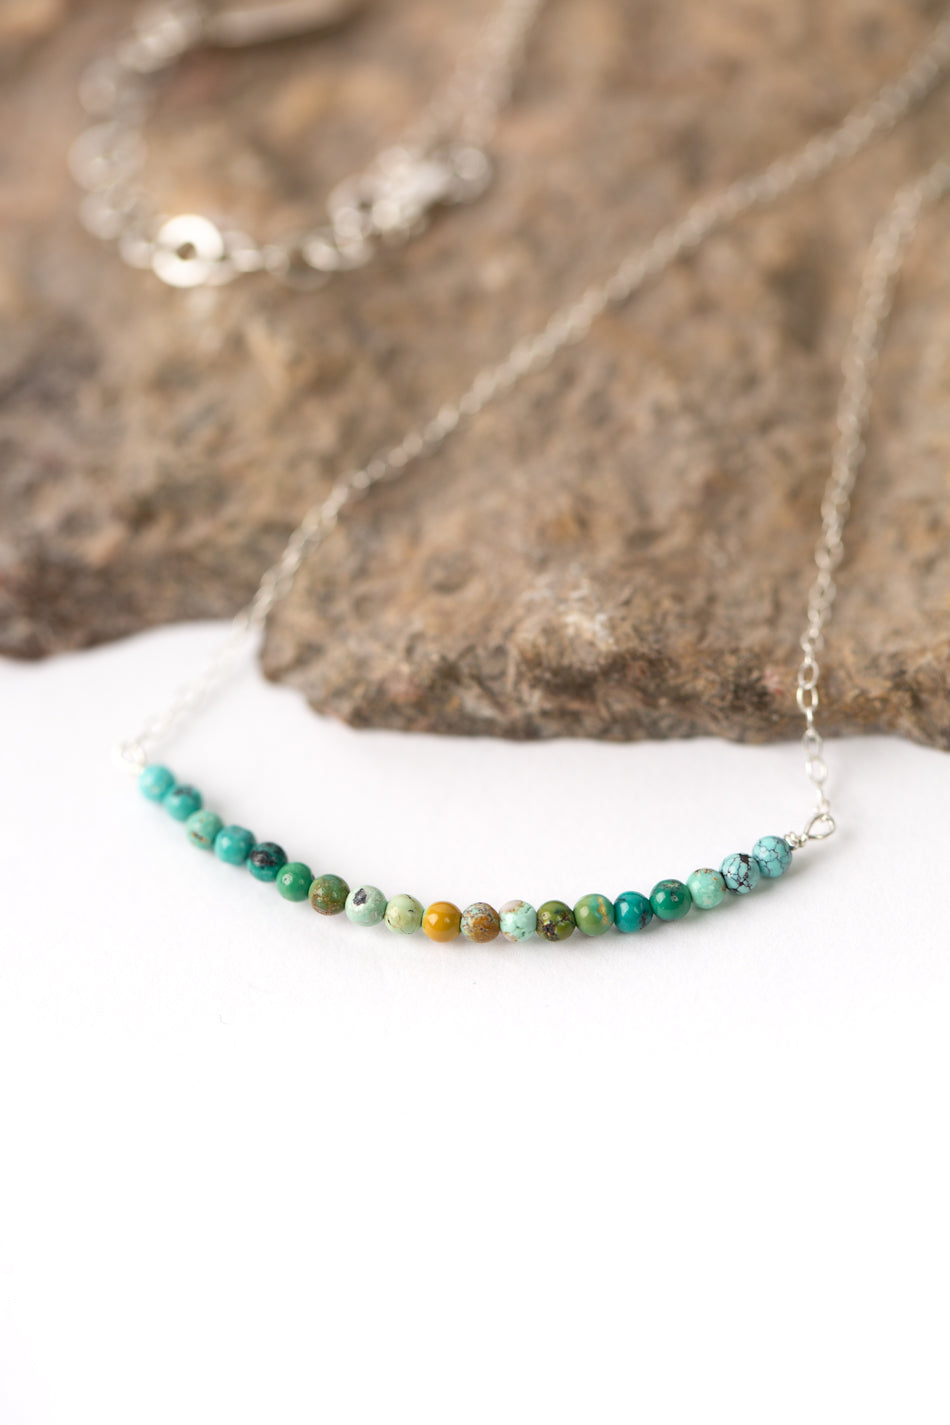 Birthstone 16-18" December Silver Turquoise Bar Necklace